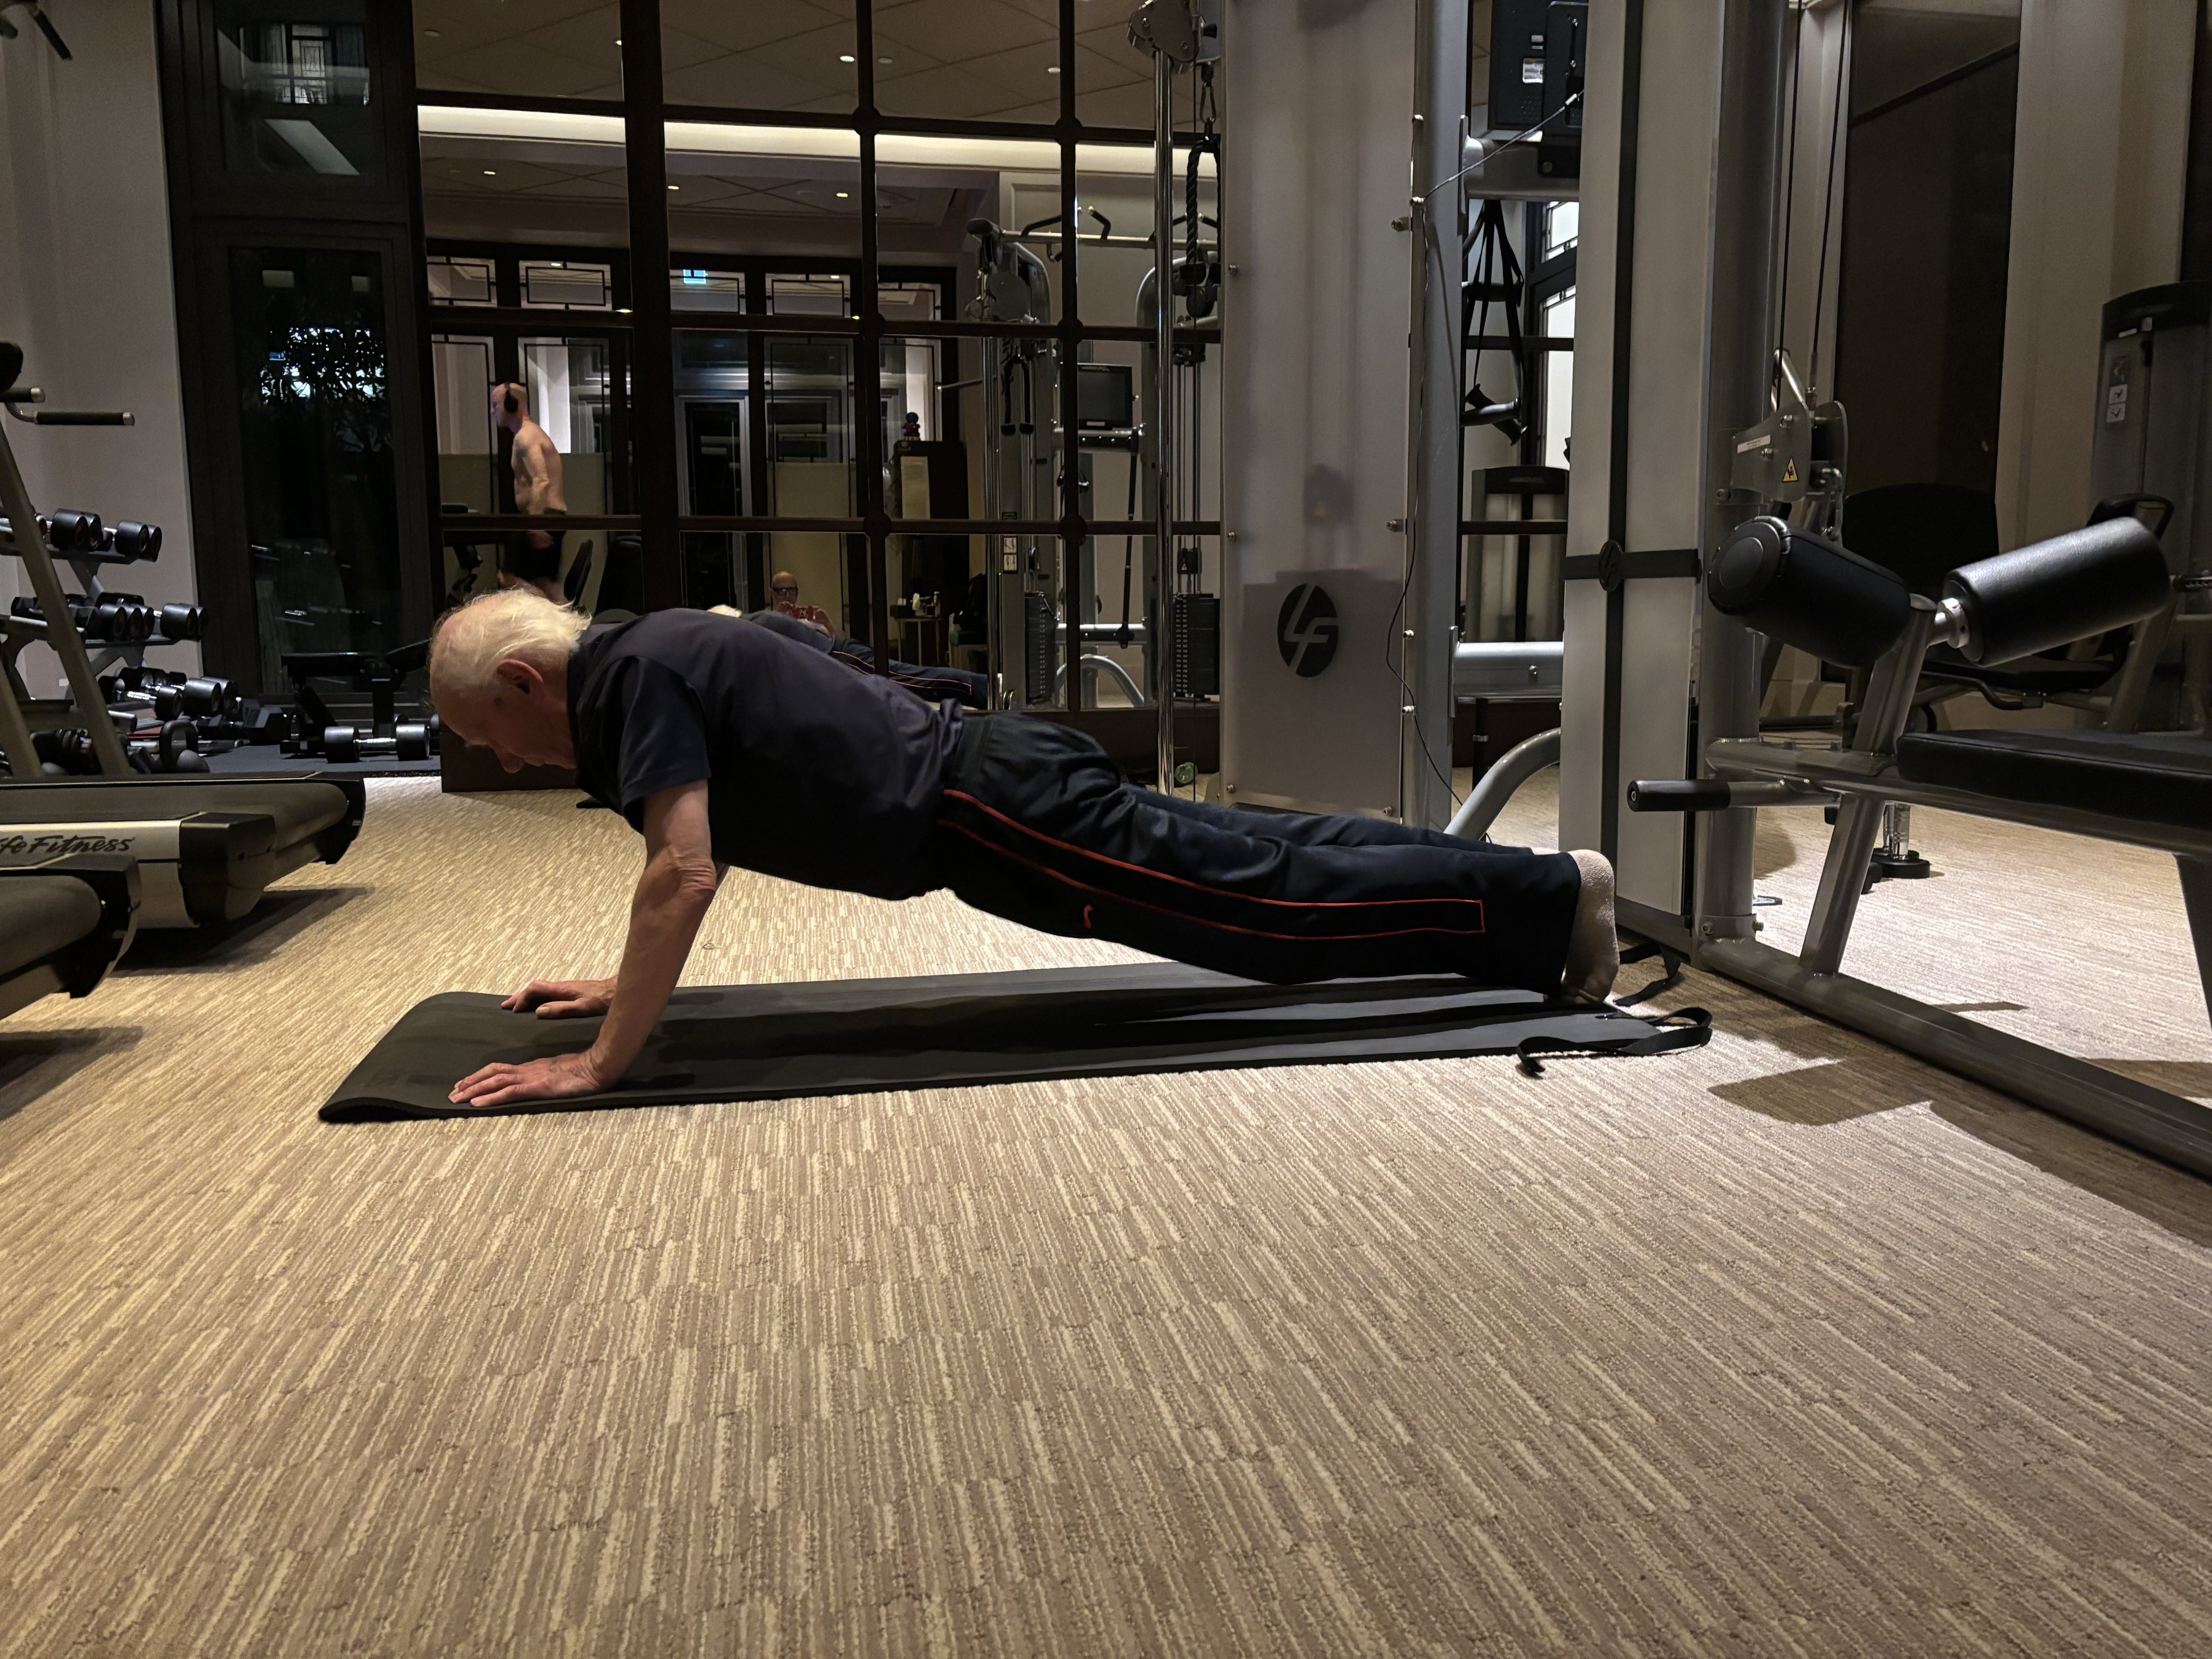 At 98, Andrei Iwanowitsch still regularly does planks, which help improve overall strength and muscular endurance. Exercise is one of many reasons why the Nazi concentration camp survivor has aged well and maintains good overall health. Photo: Andrei Iwanowitsch